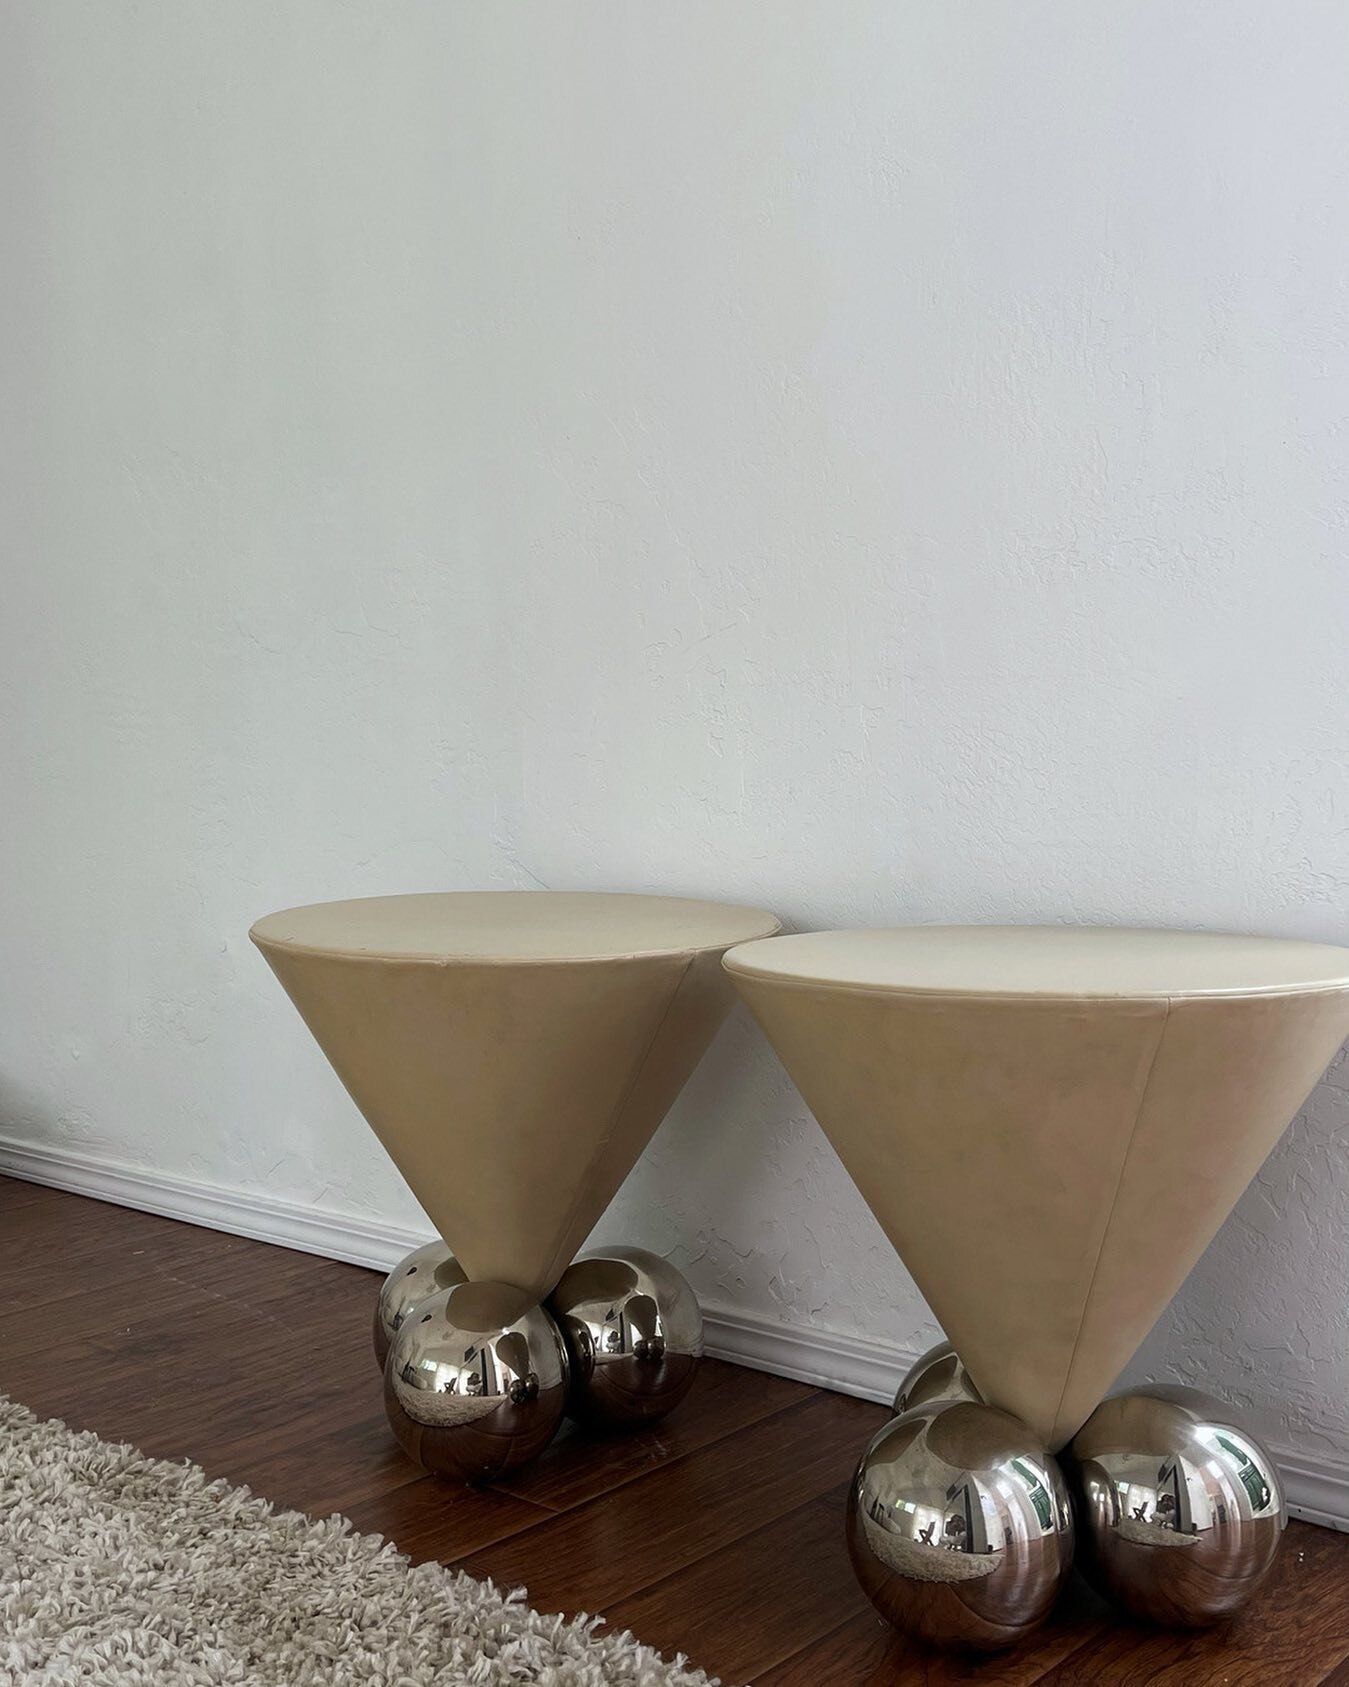 I try not to ever buy on a whim, usually my design decisions are intentional and thought-through, but I came across these vintage leather Brueton side tables on @chairishco, and made an offer out of sheer vintage instant gratification, then there was